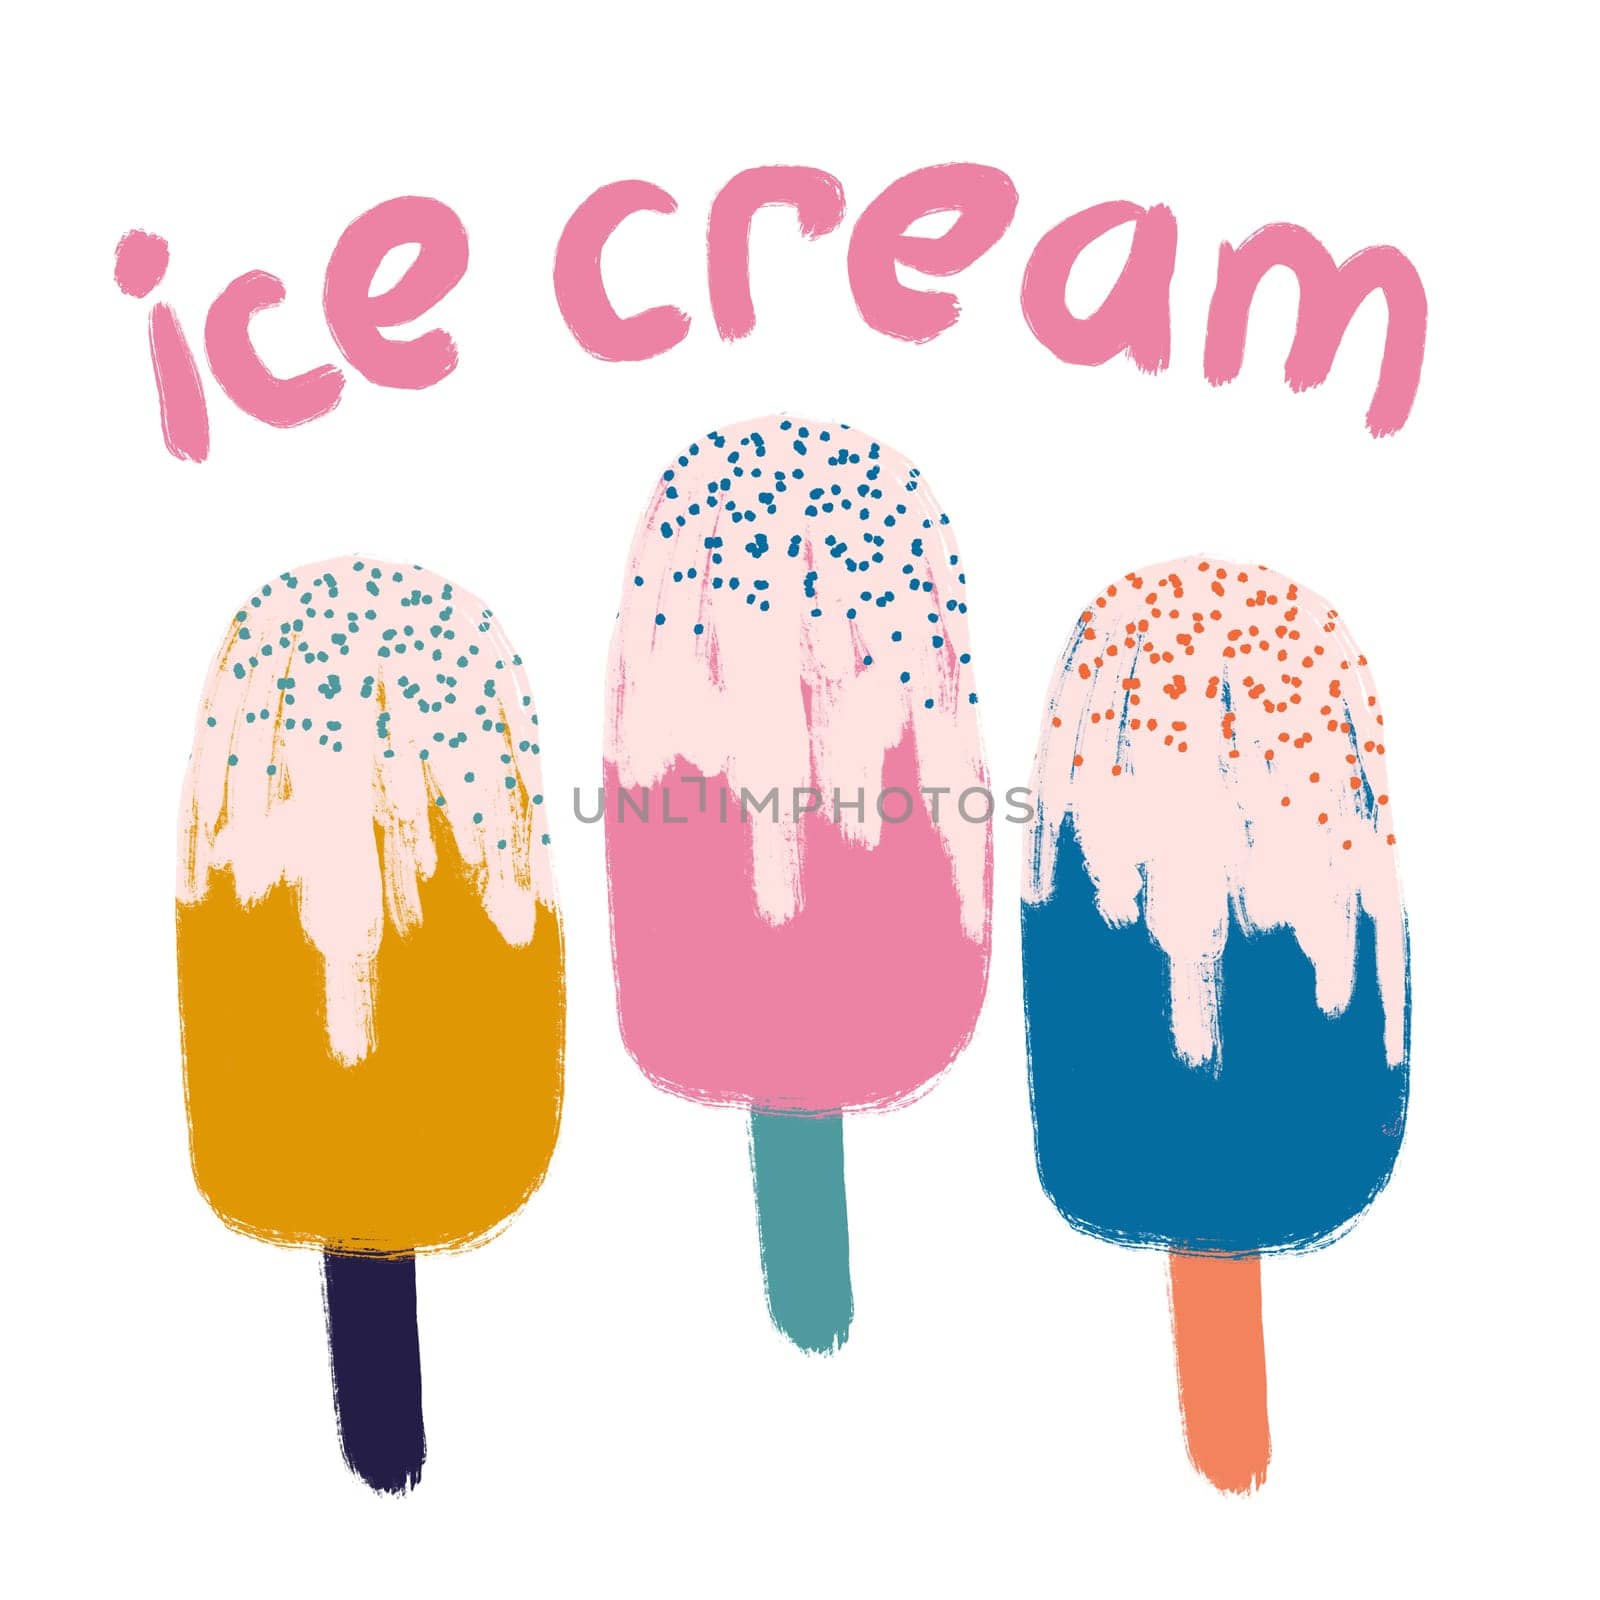 Hand drawn illustration of ice cream popsicle retro vintage style. Pink blue yellow round shape with chocolate, sweet tasty summer holiday food, fun design for colorful beach art.